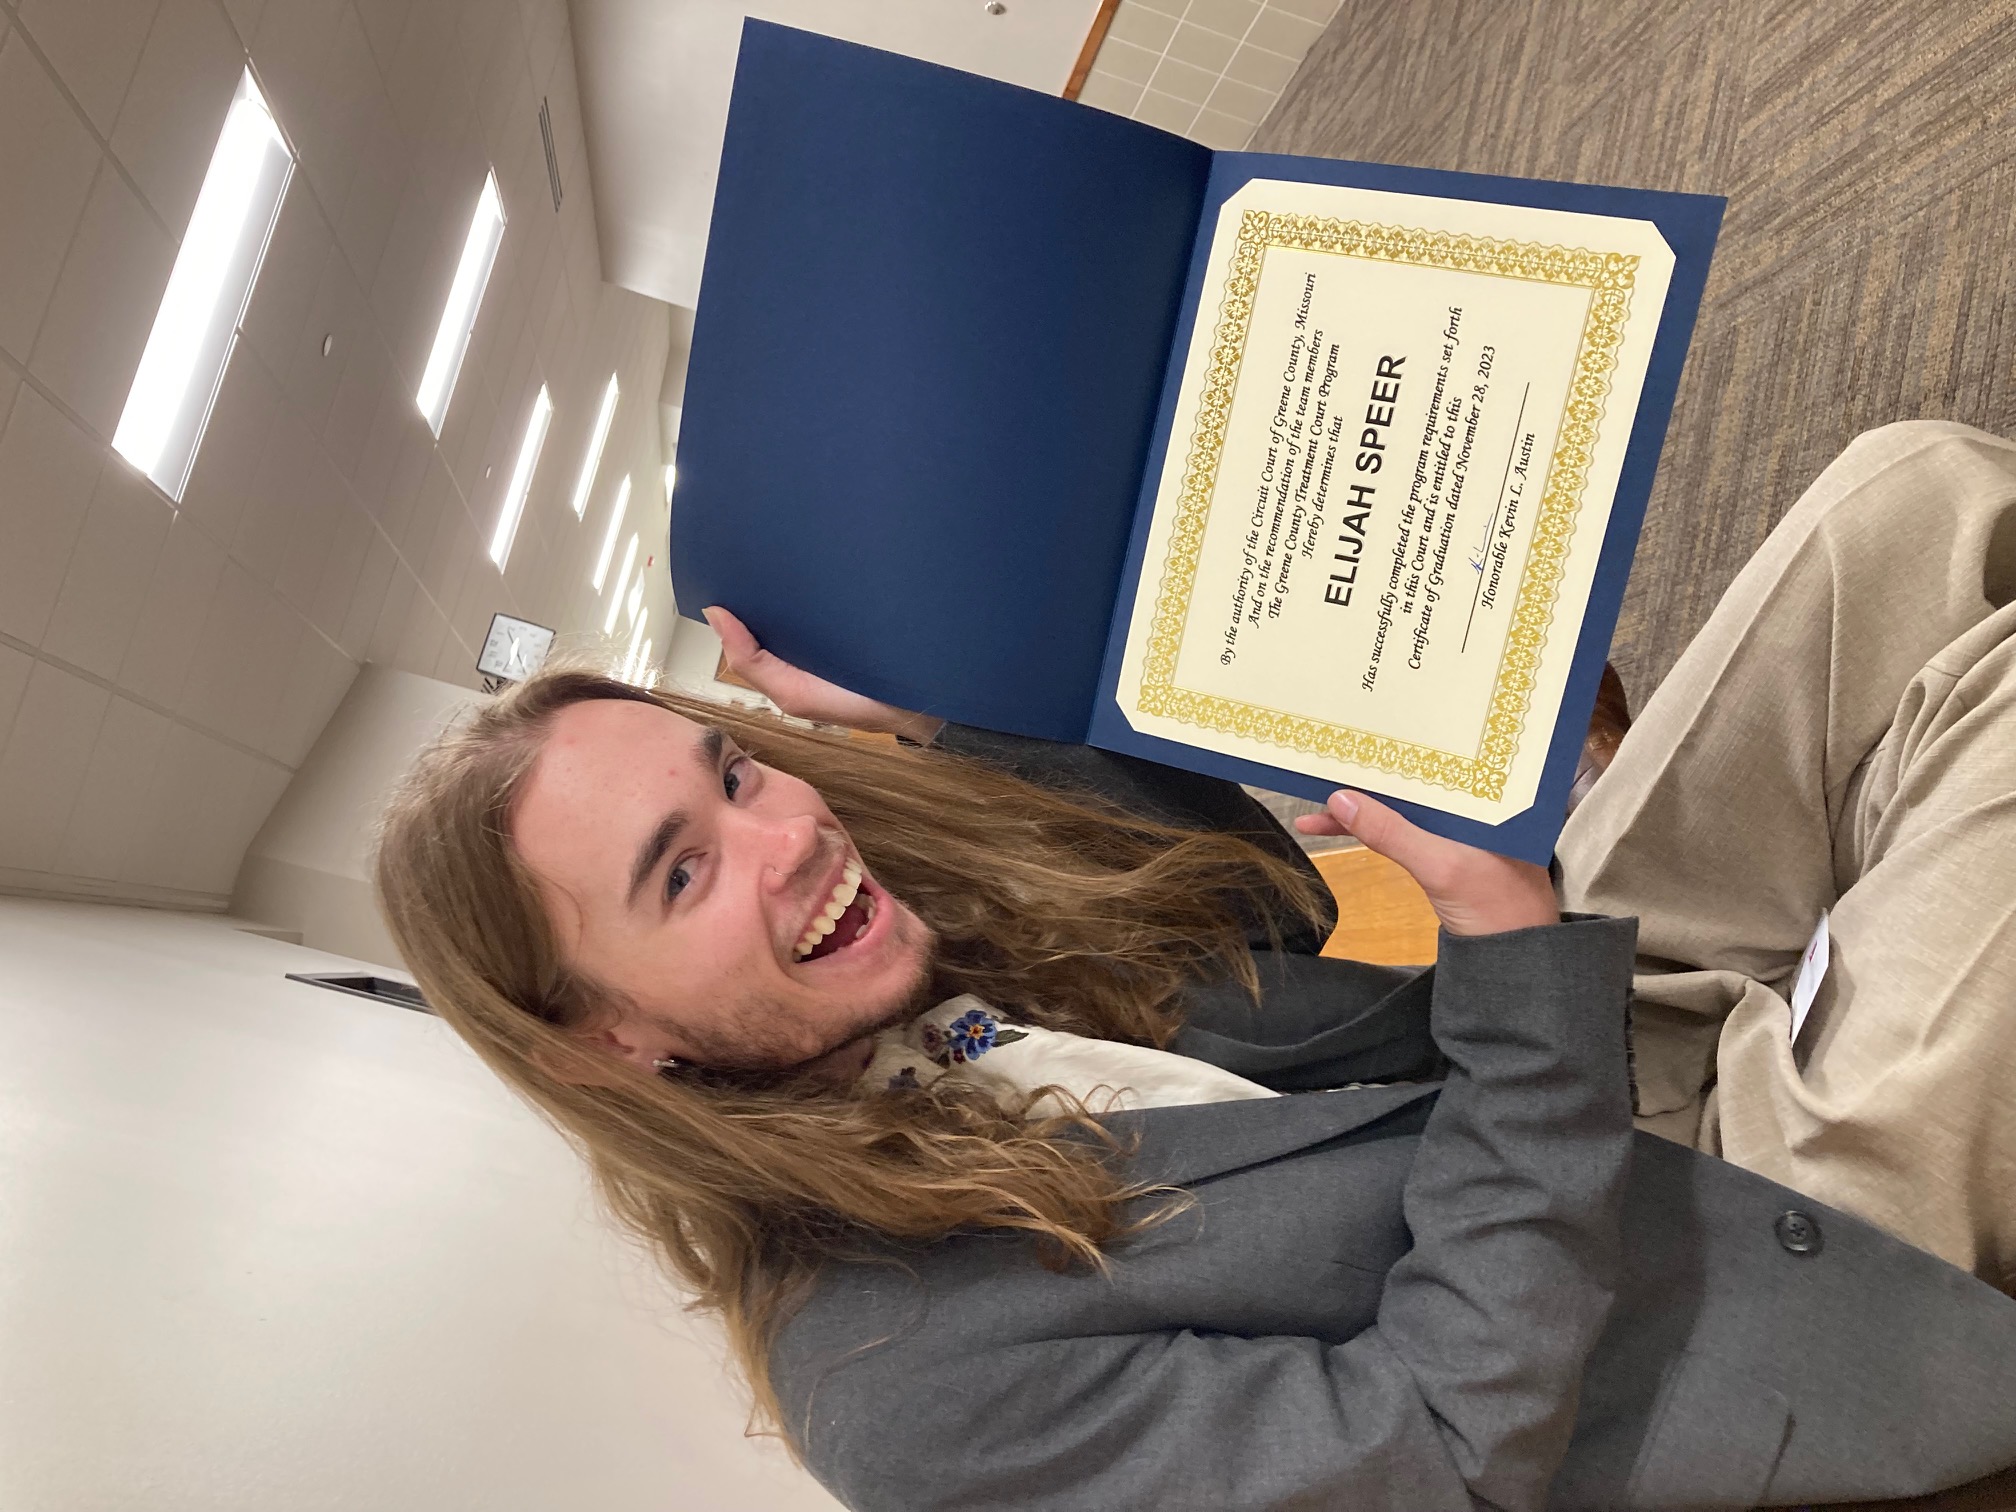 Elijah Speer shows off his treatment court certificate in the hallway outside the courtroom.